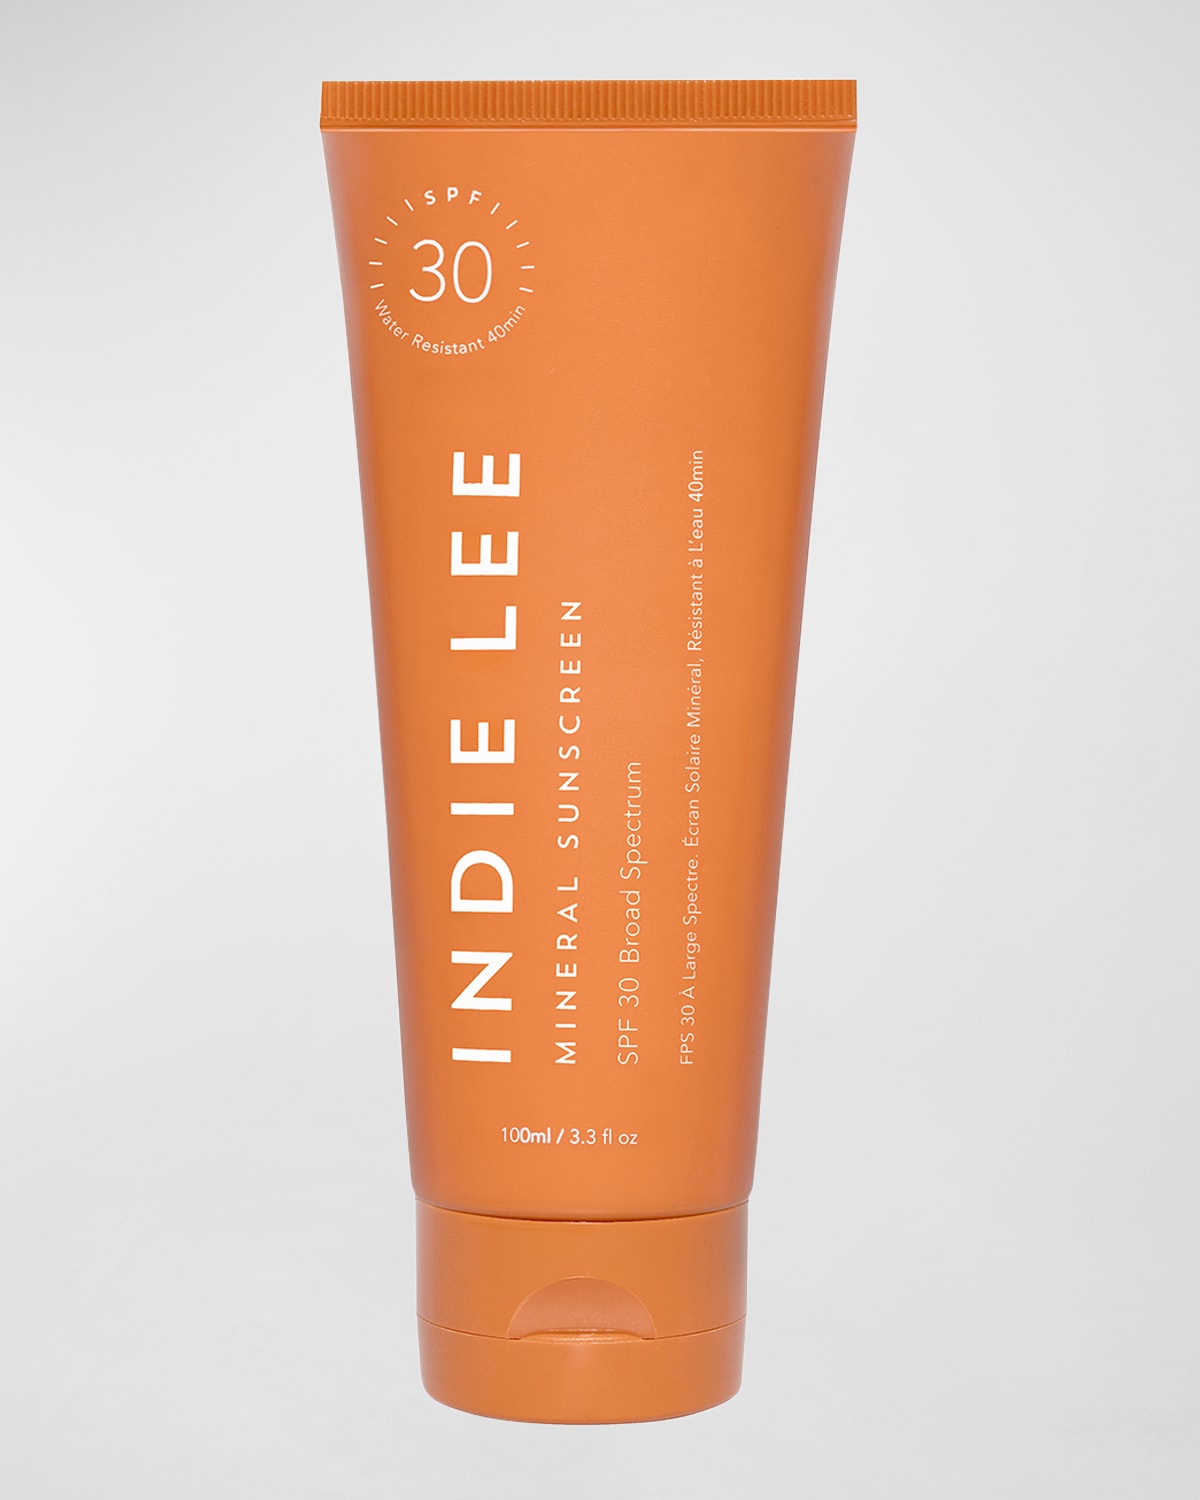 Indie Lee SPF 30 Mineral Sunscreen, 3.4 oz.